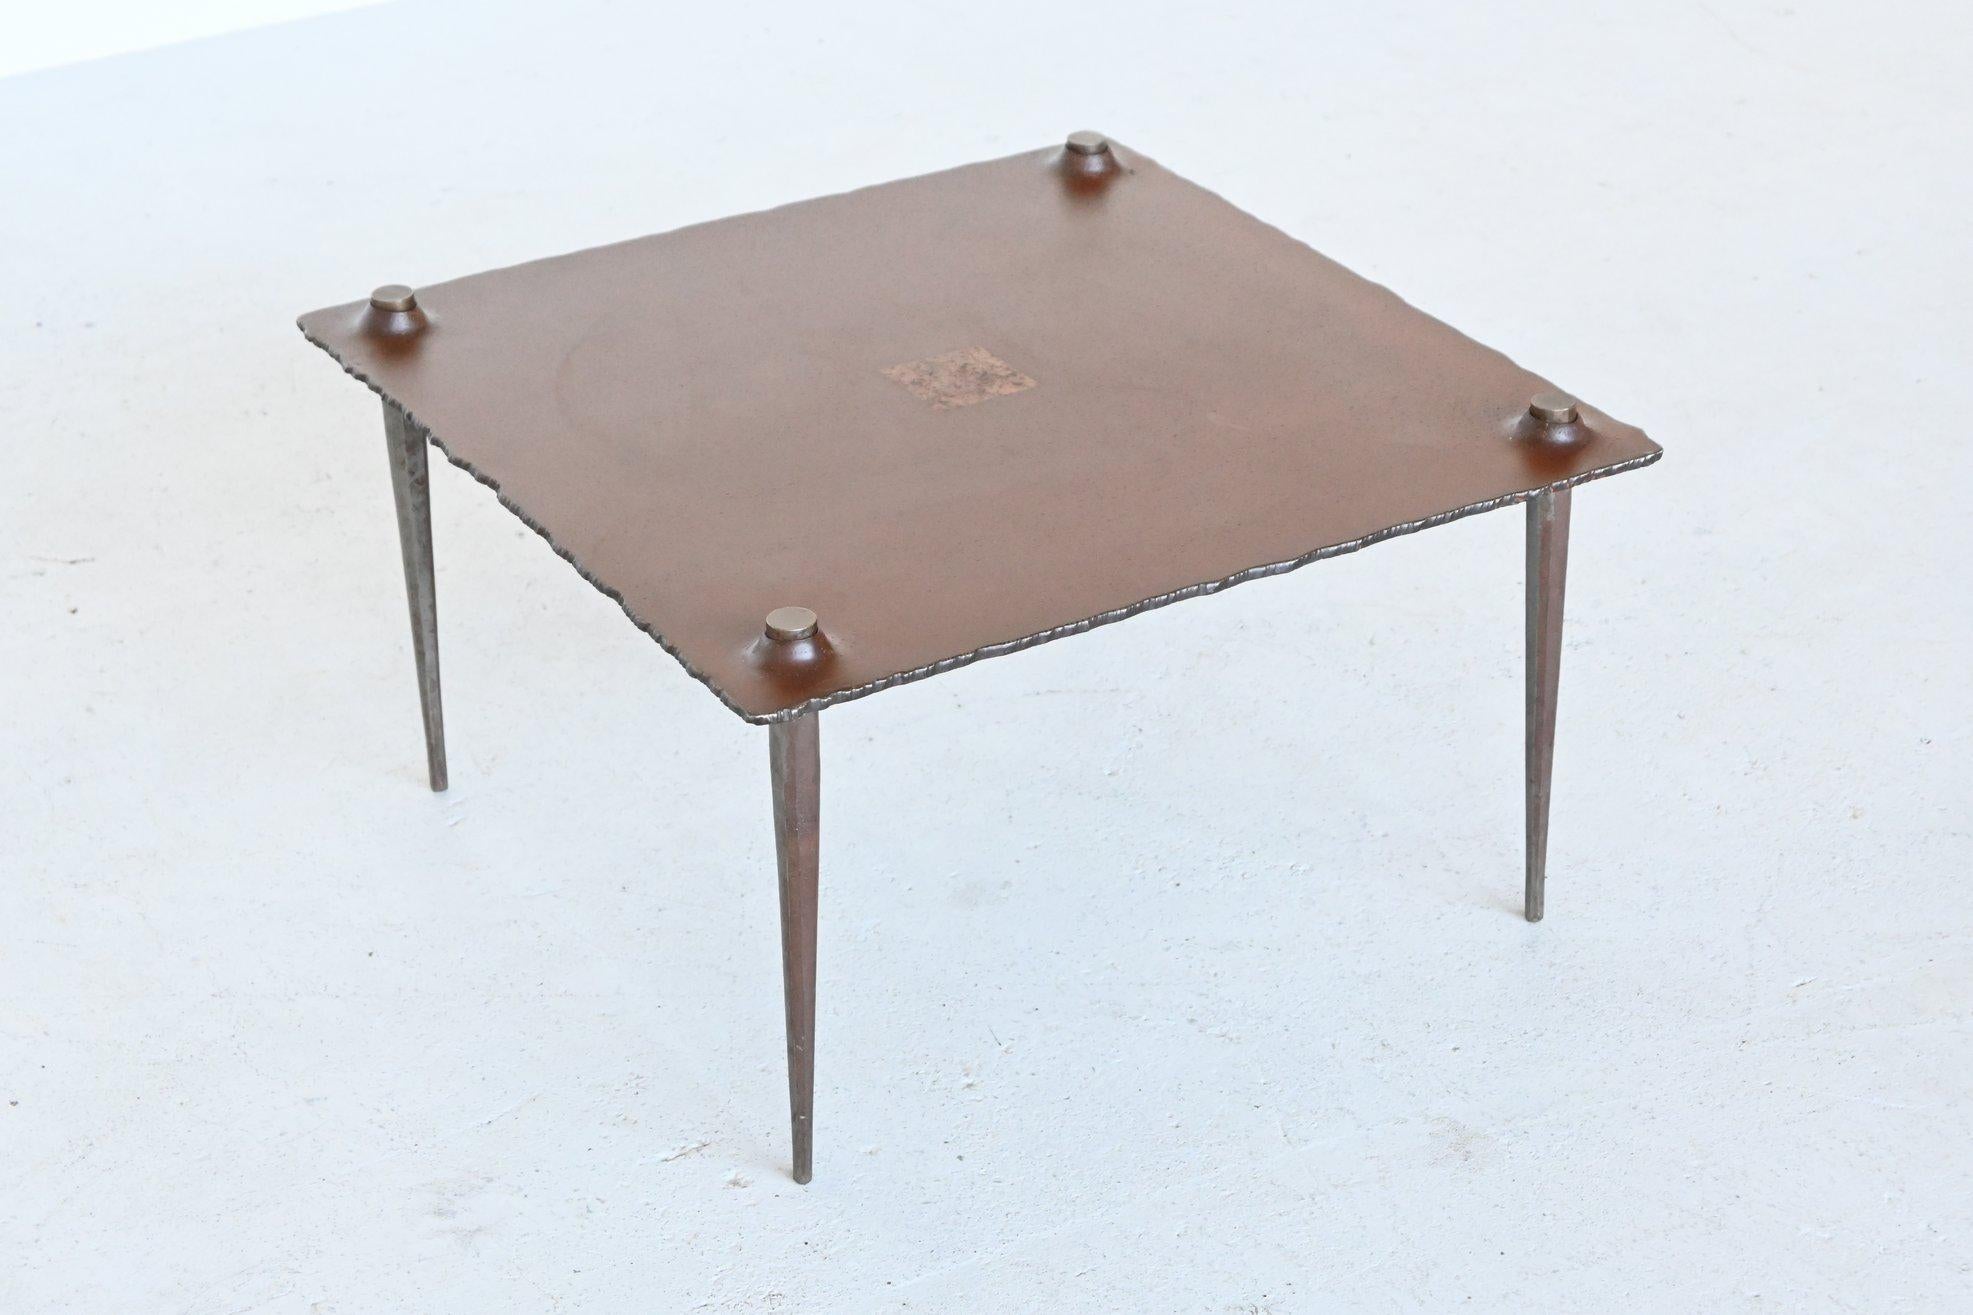 Fantastic shaped Brutalist coffee table by Idir Mecibah, produced by Smederij Moerman 1998. This table is from the scrab series designed in the end of the 1980s and produced till the end of the 1990s. It’s made of solid steel with gold leaf square